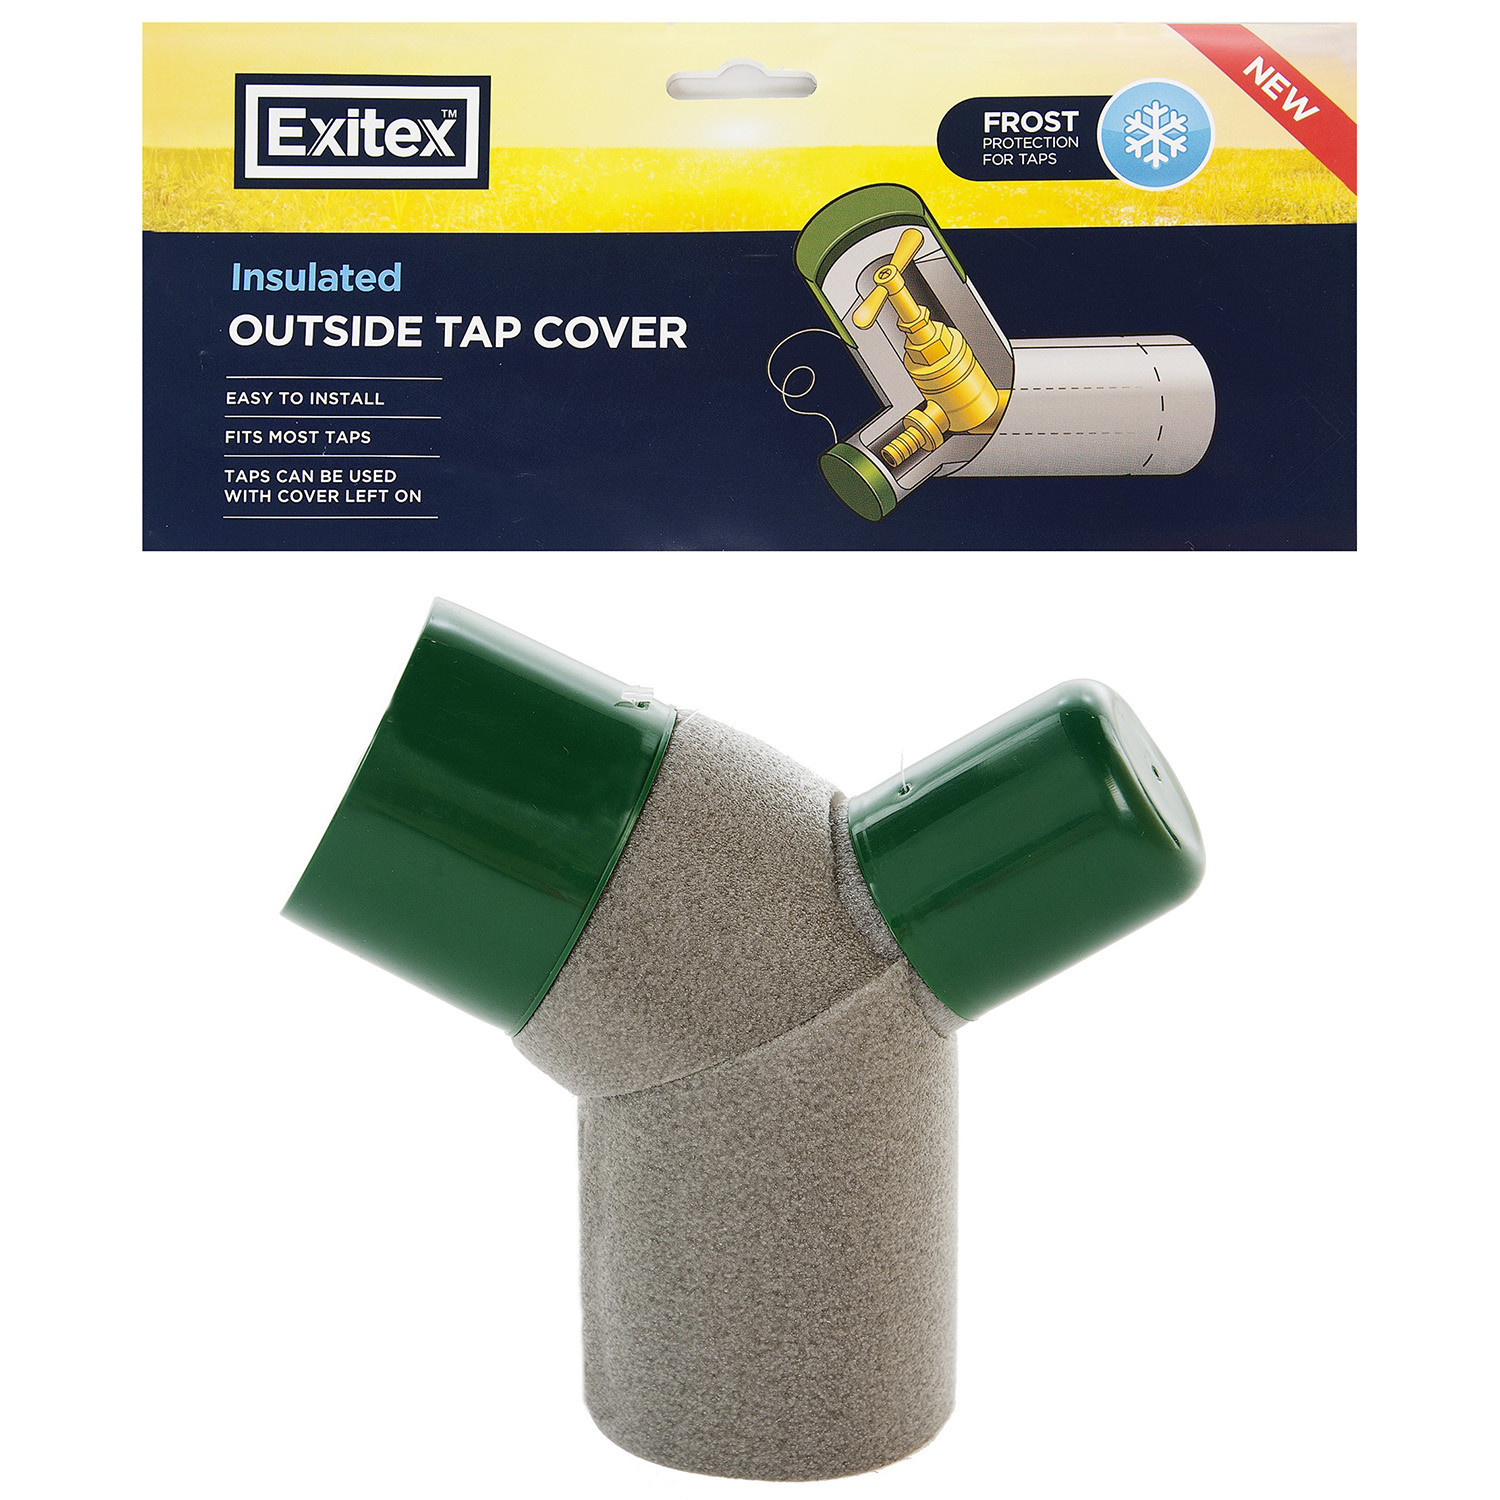 Insulated Outside Tap Cover Image